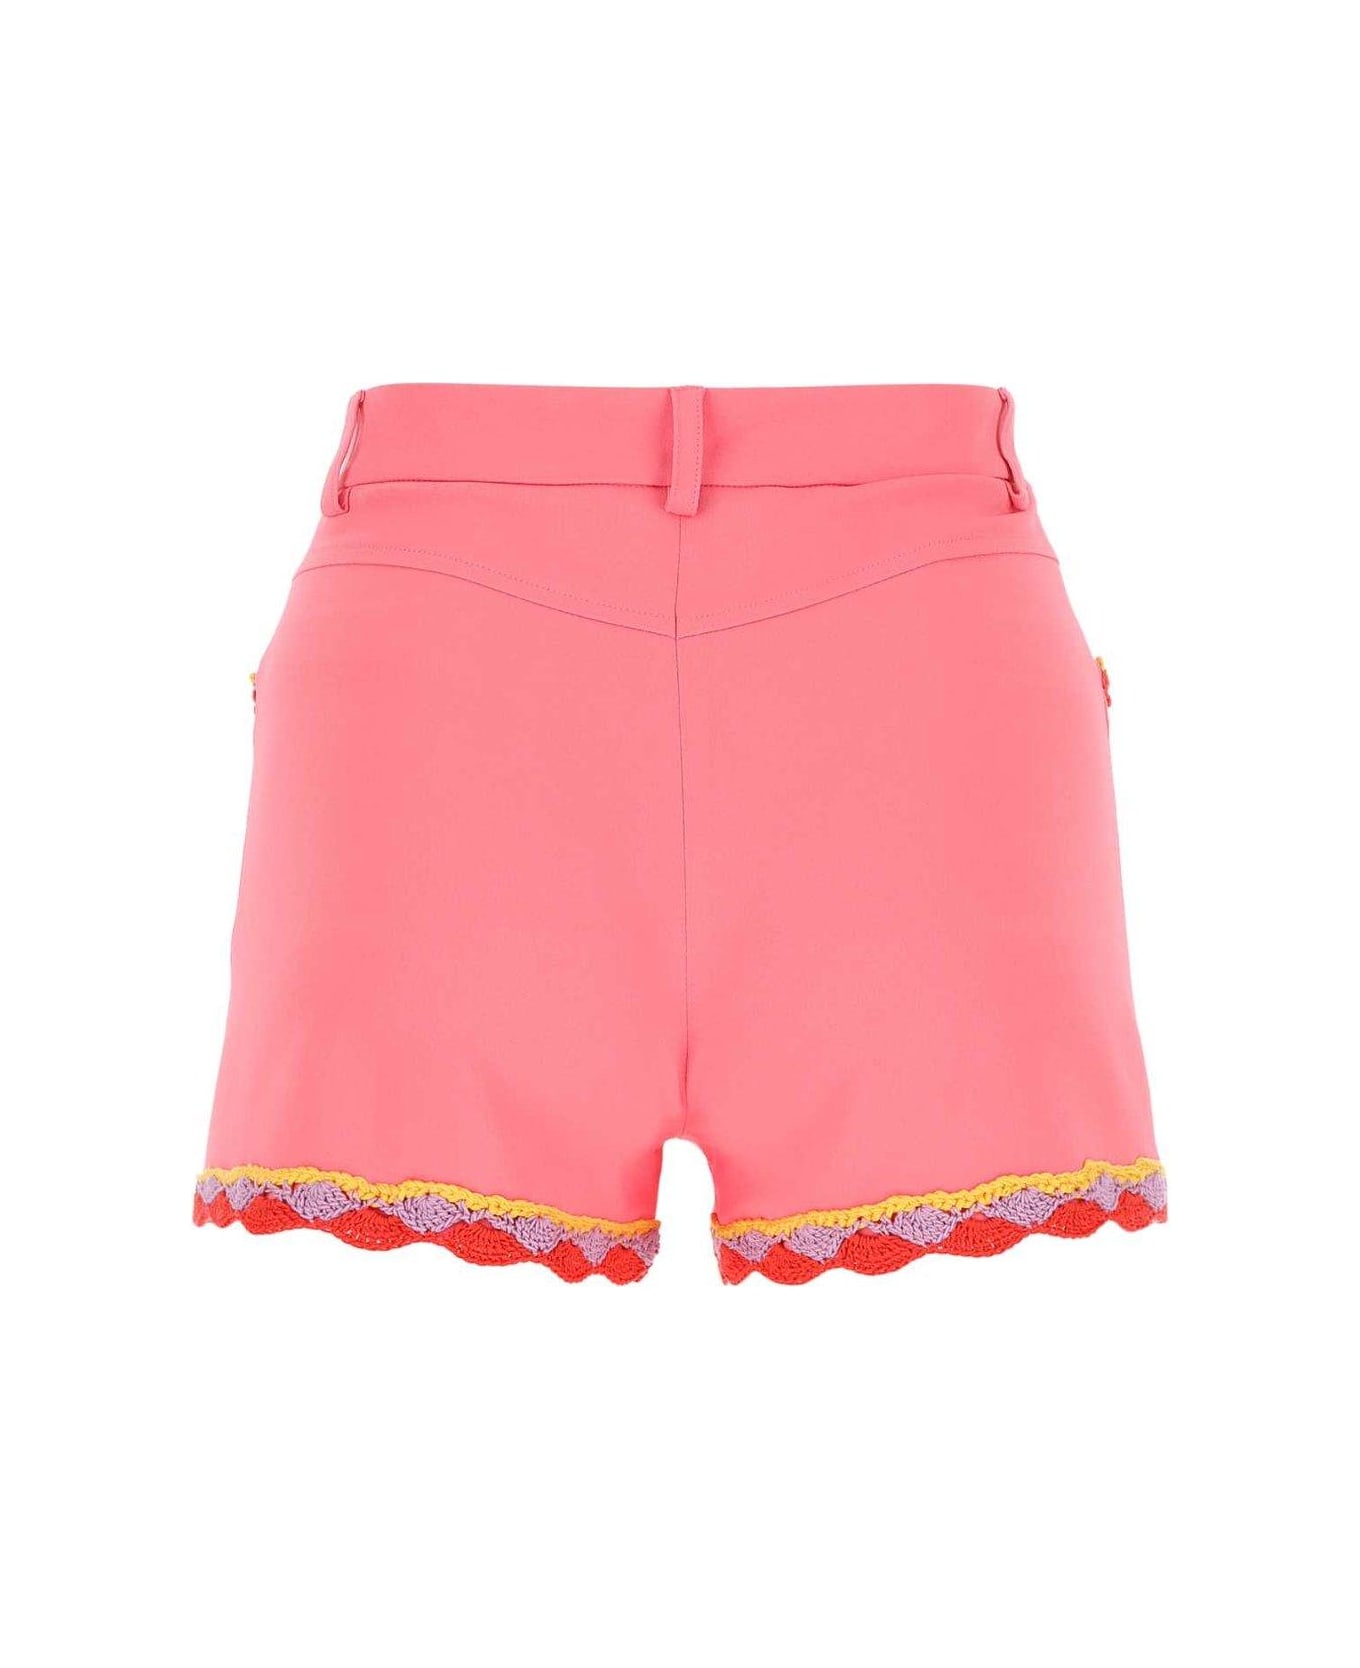 Moschino High-waist Lace-trim Buttoned Shorts - PINK